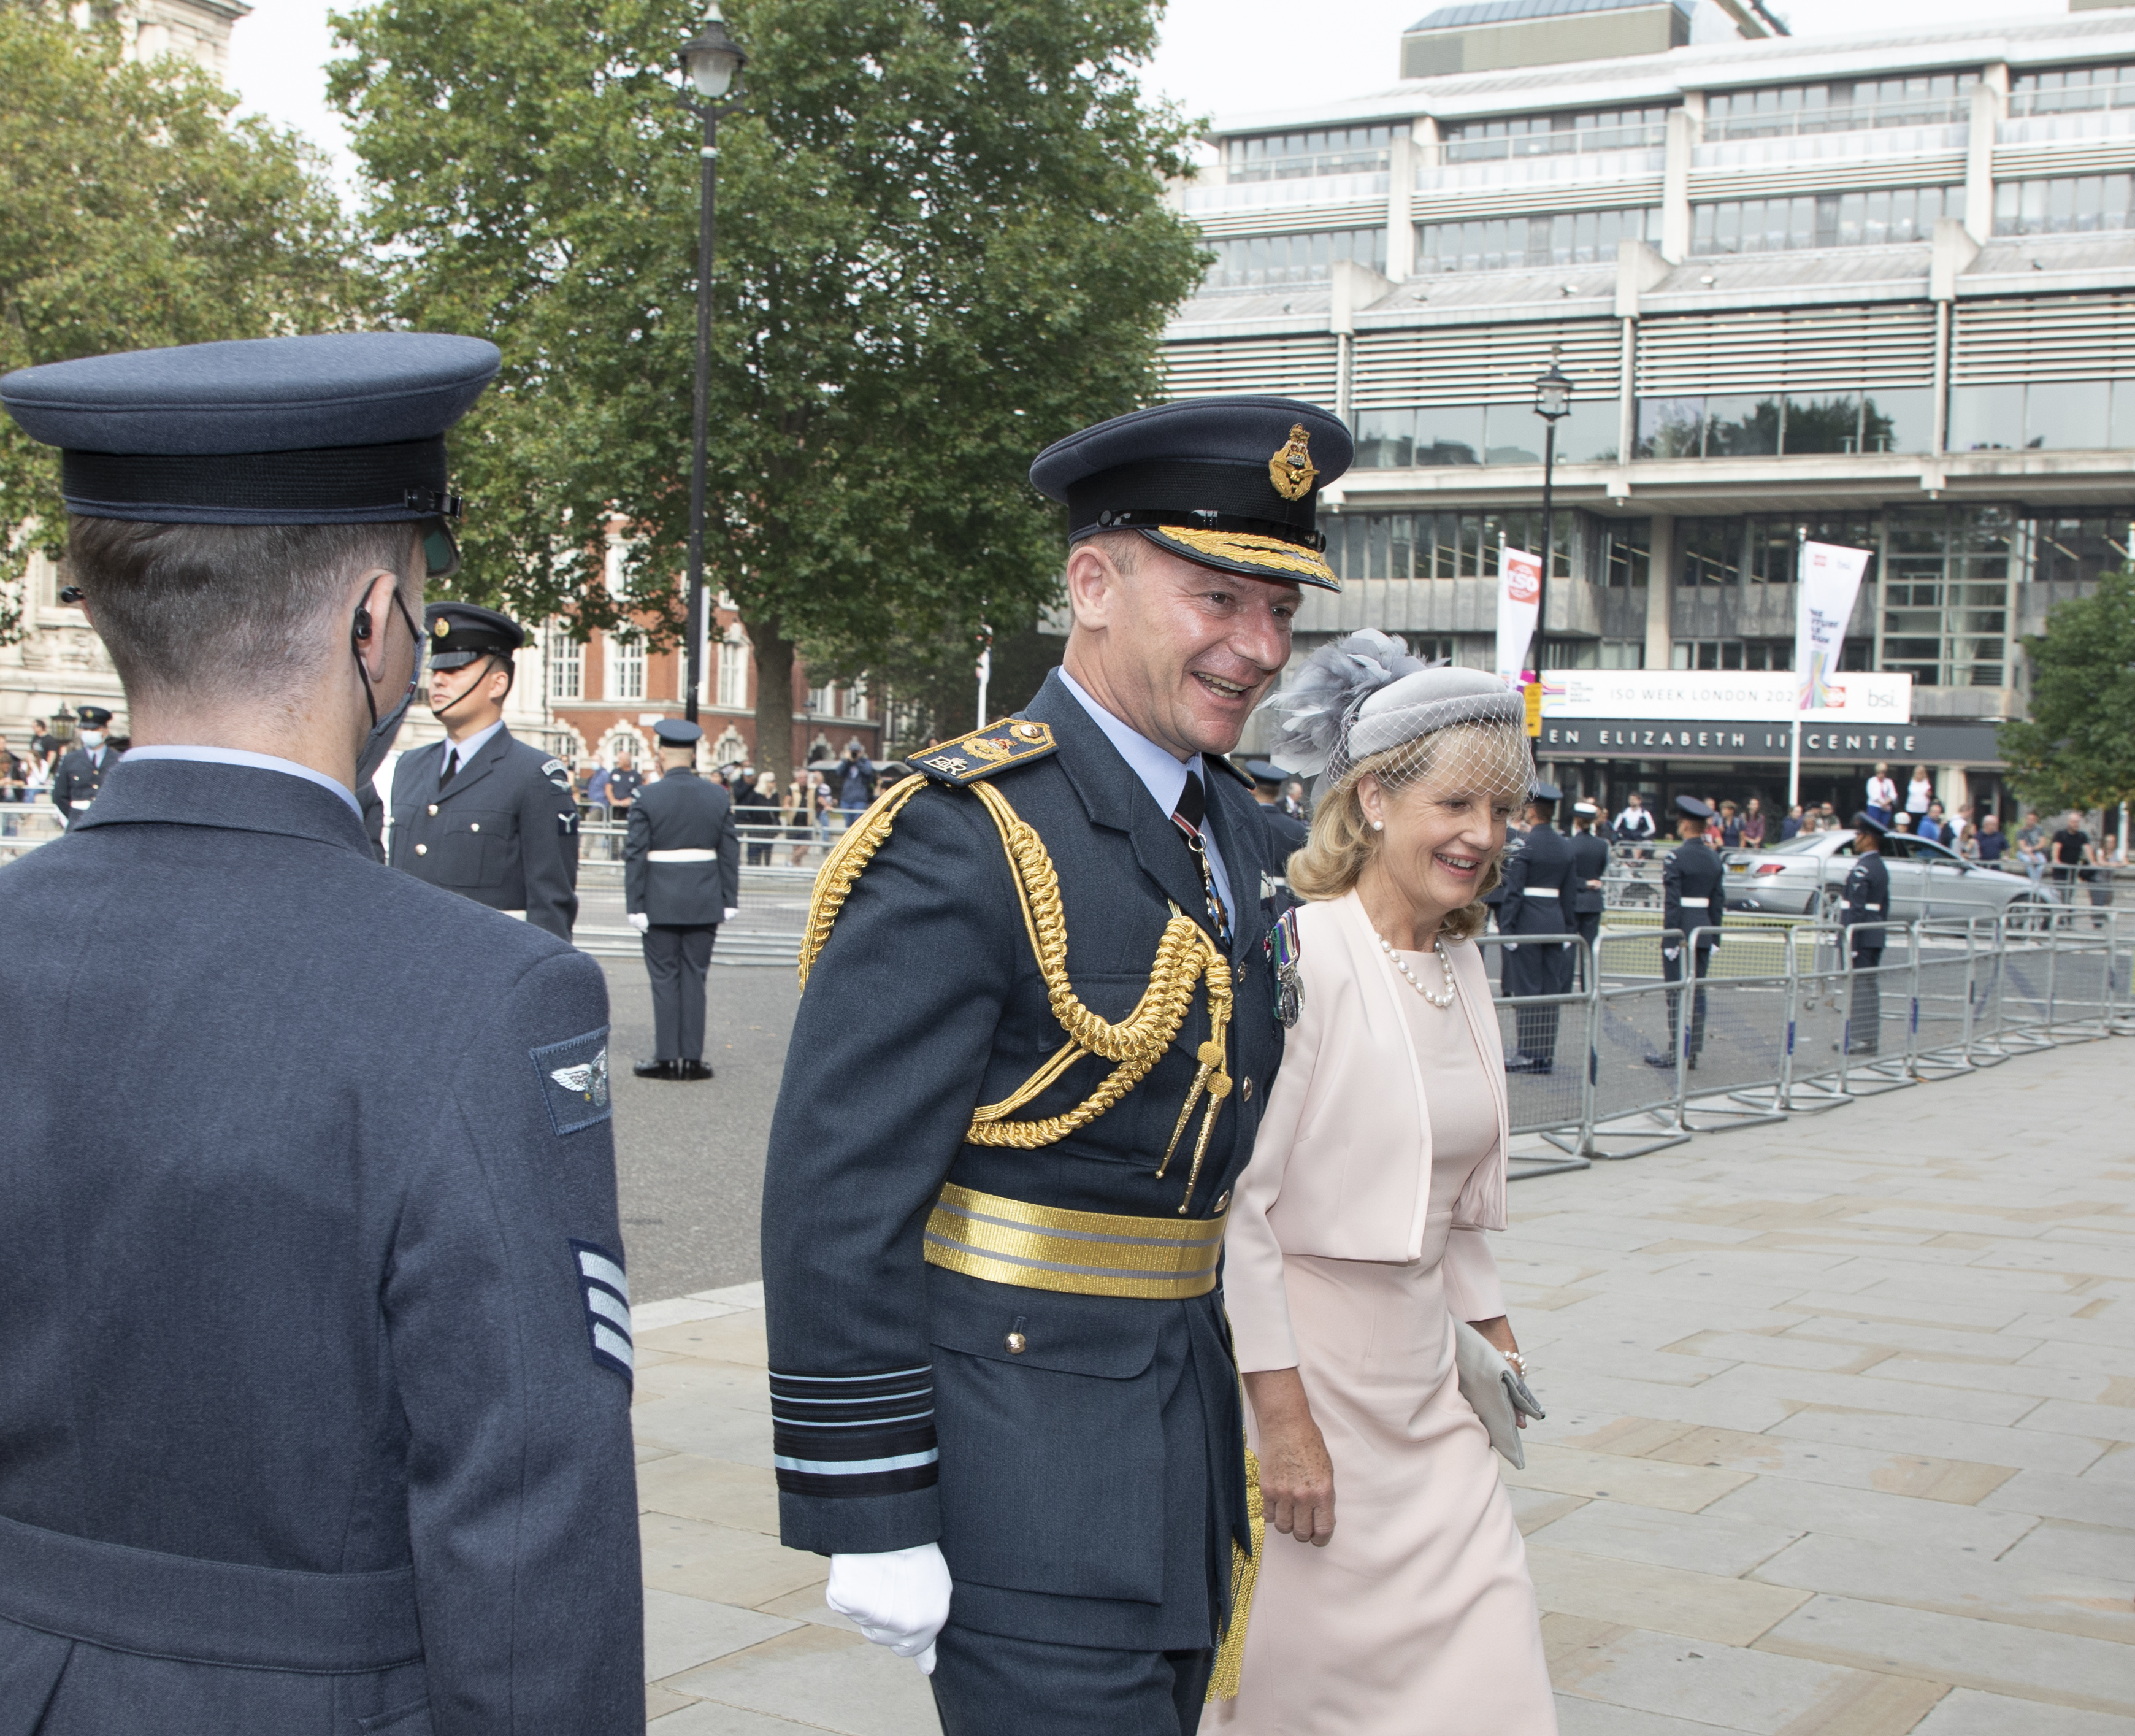 Air Chief Marshal walks with wife towards Westminster Abbey.